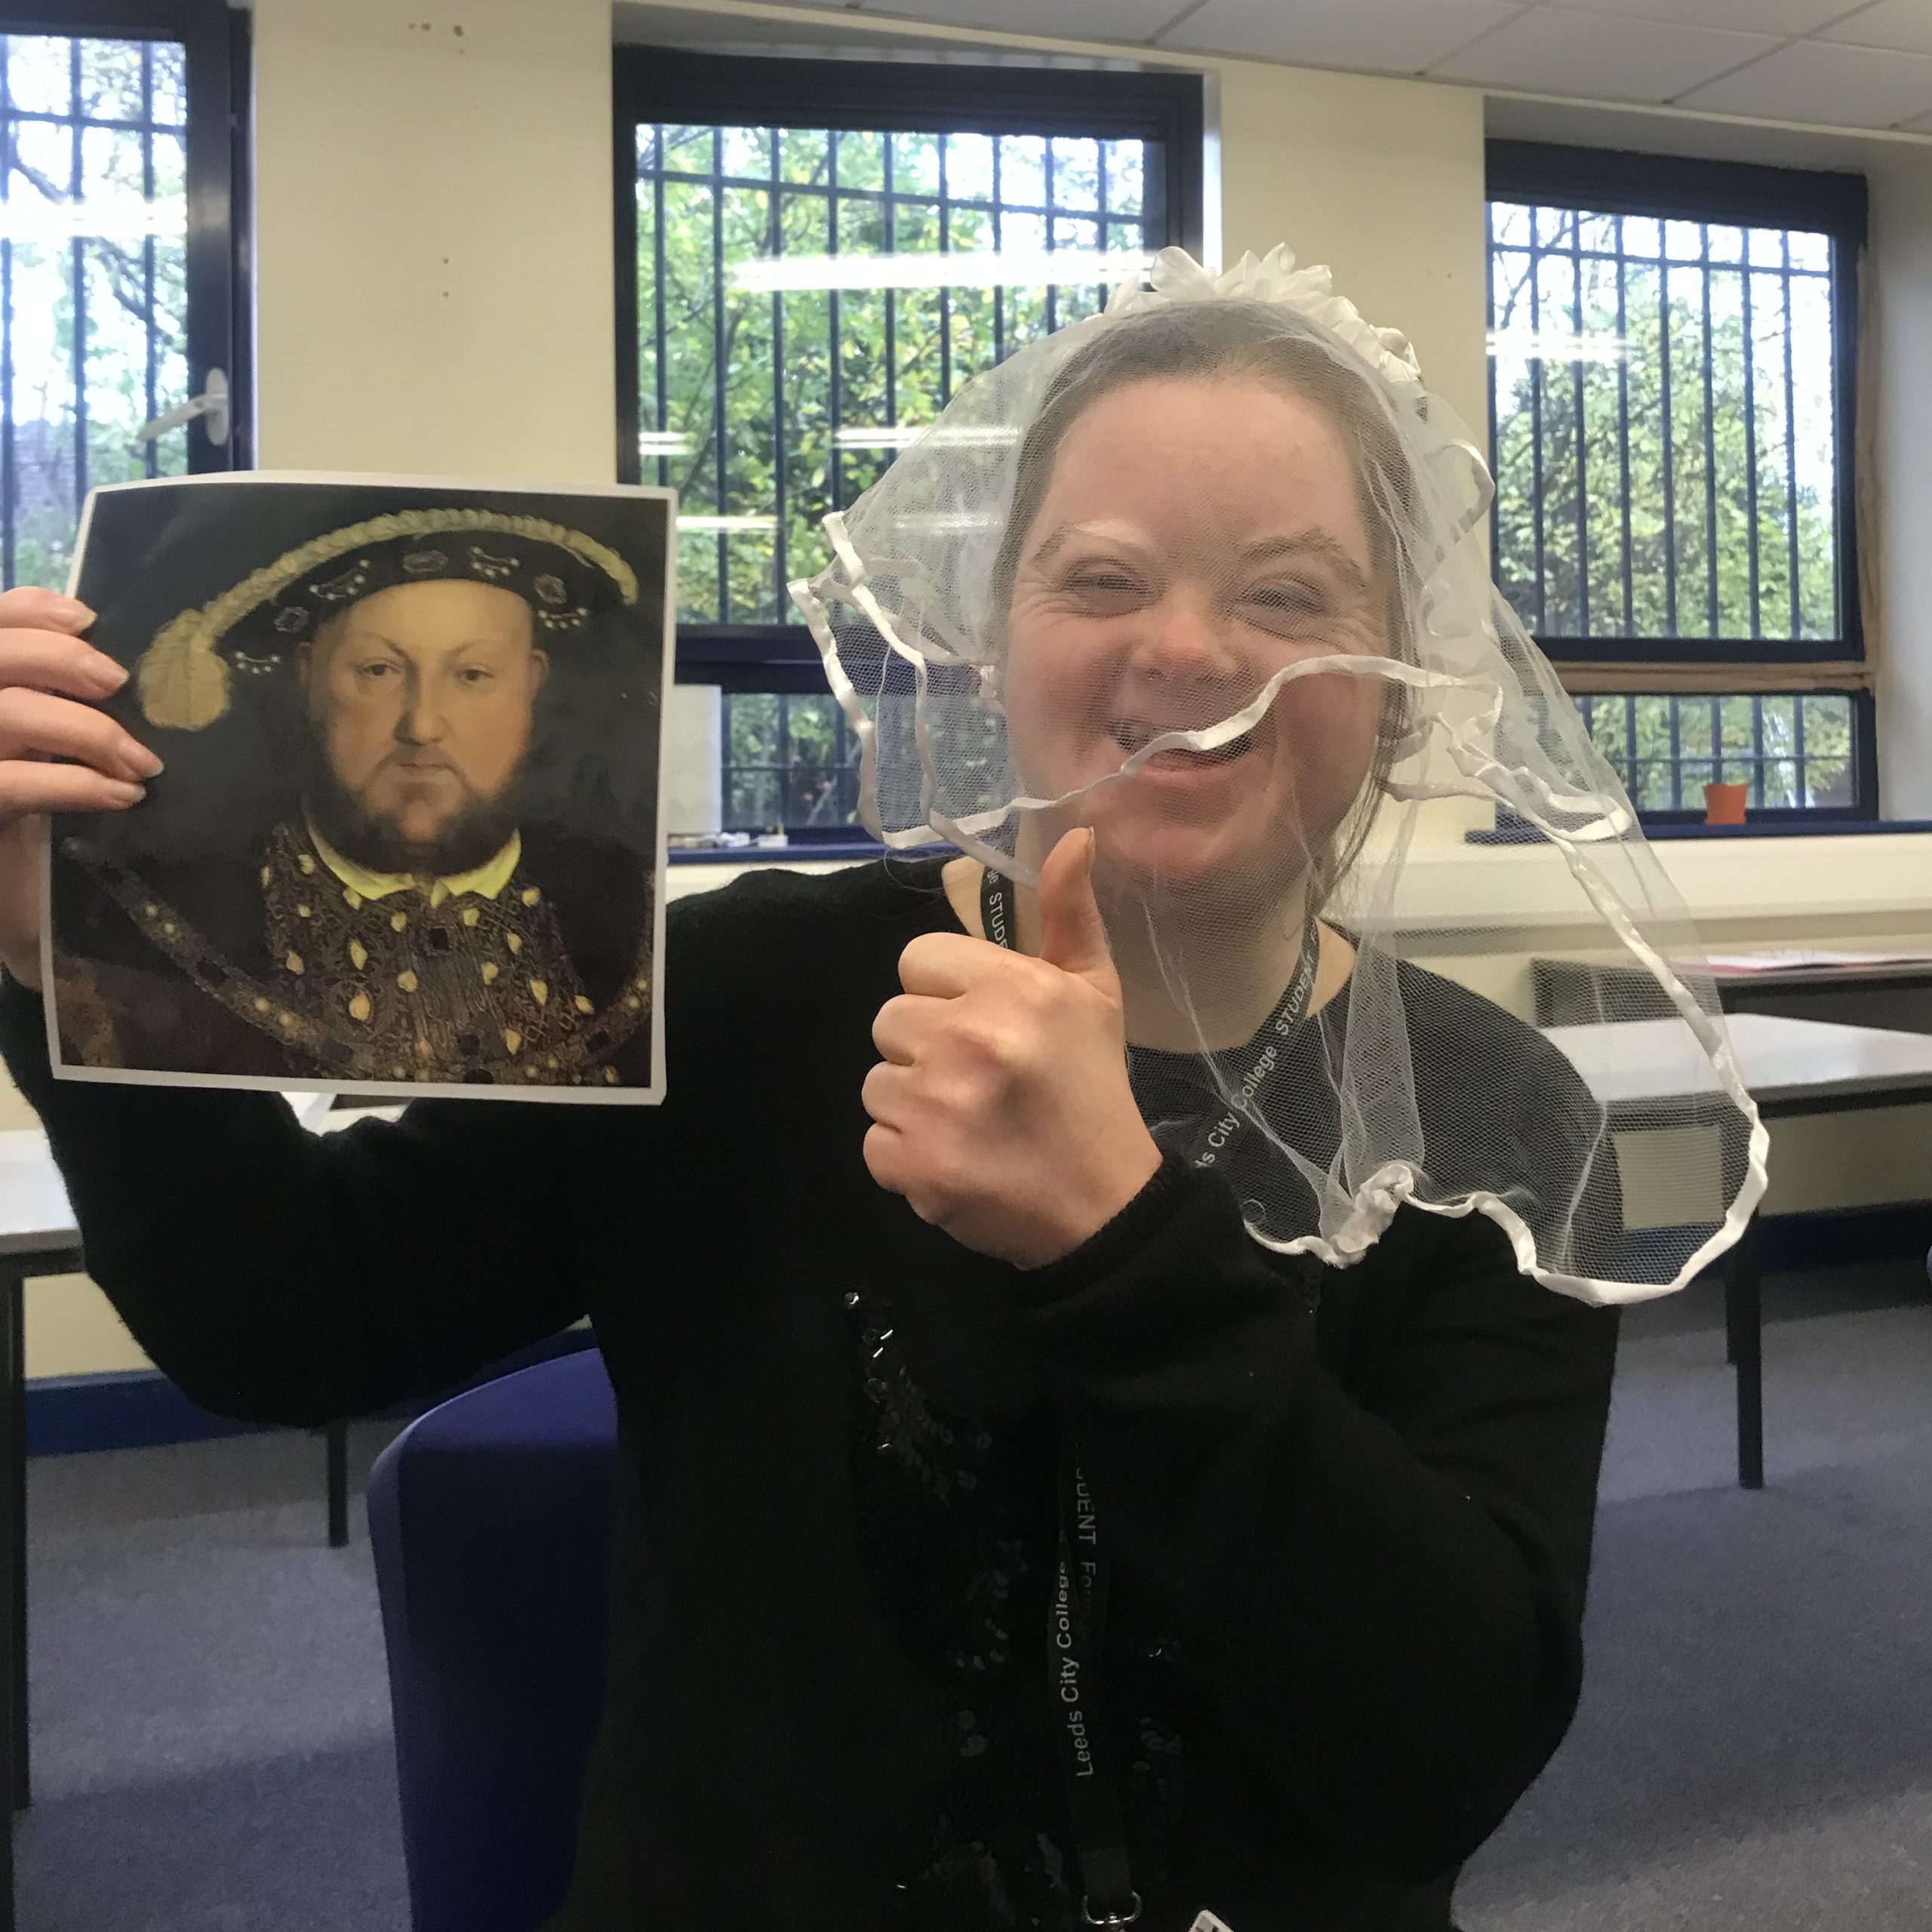 A woman is smiling and doing a thumbs up to the camera. She is wearing a wedding veil and holding up a picture of King Henry VIII.